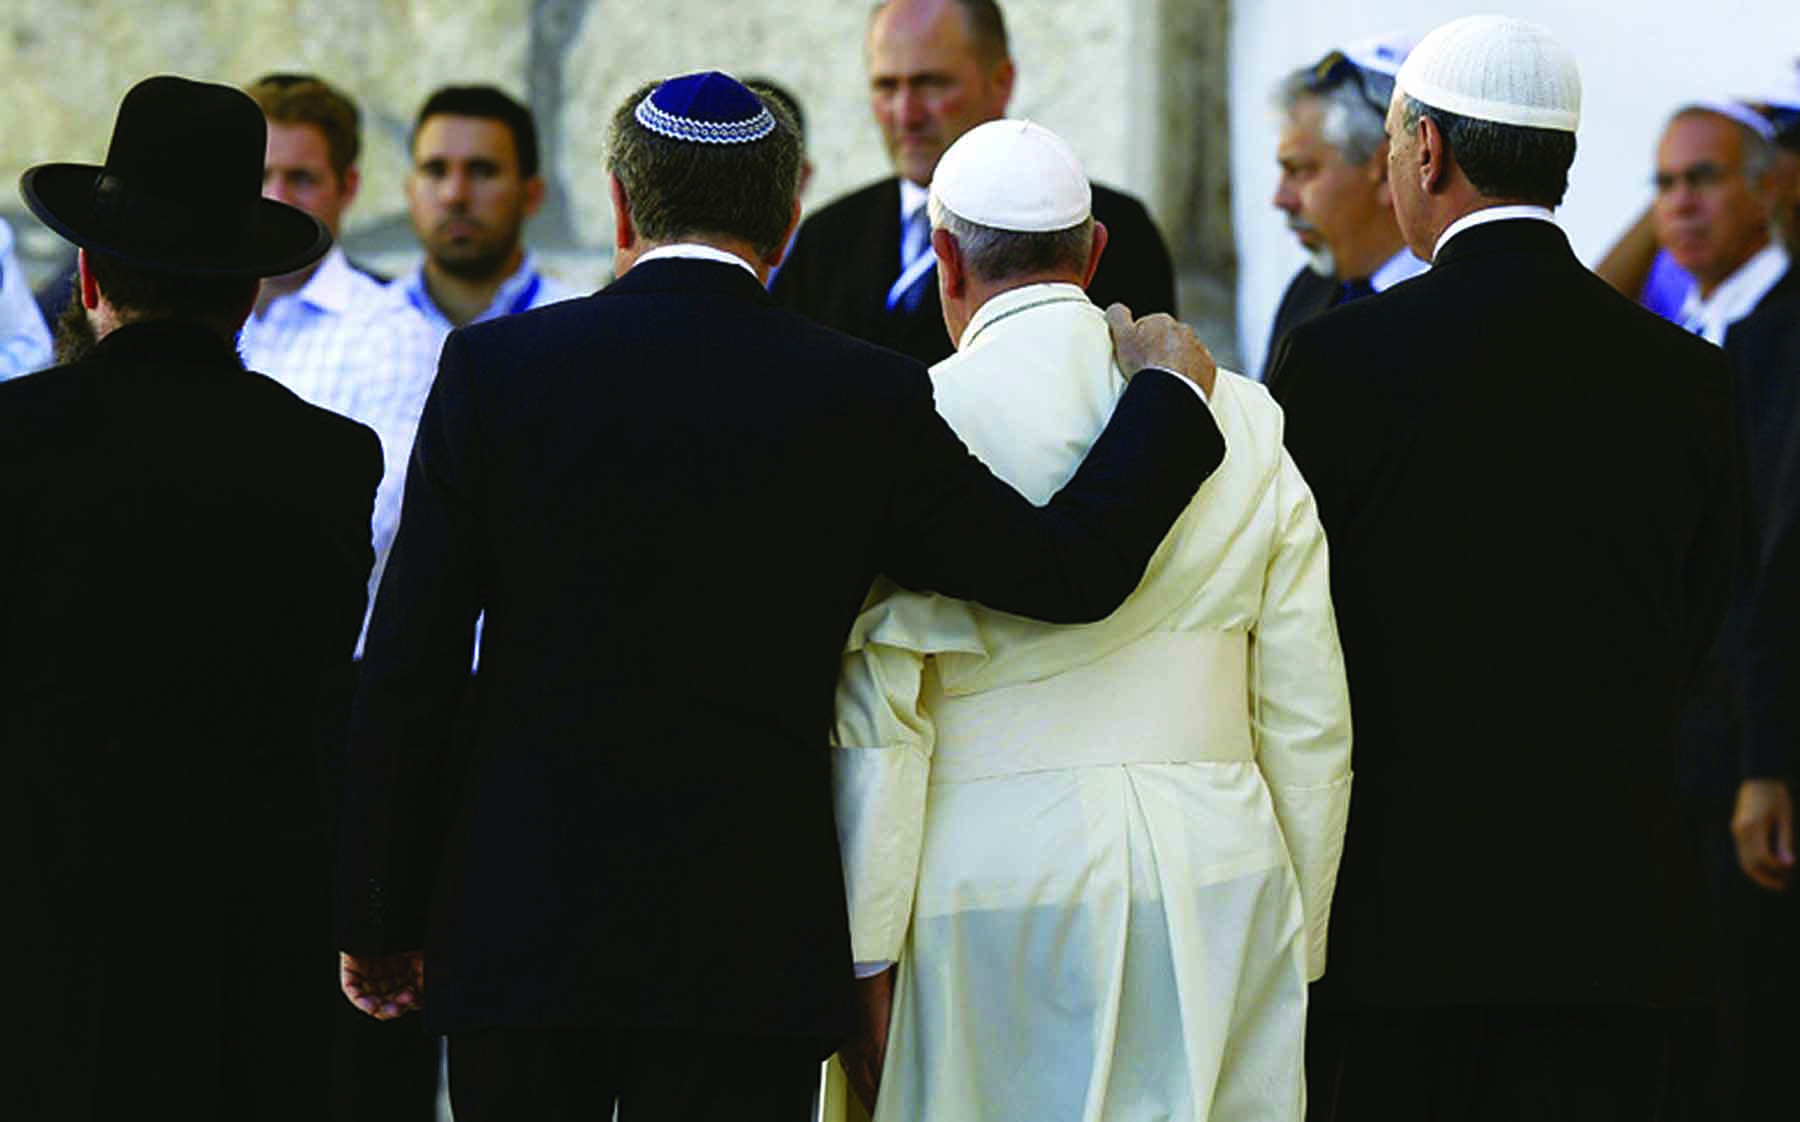 Argentine Rabbi Abraham Skorka, a longtime friend, embraces Pope Francis after praying at the Western Wall in Jerusalem in 2014. (Photo by CNS/Paul Haring)